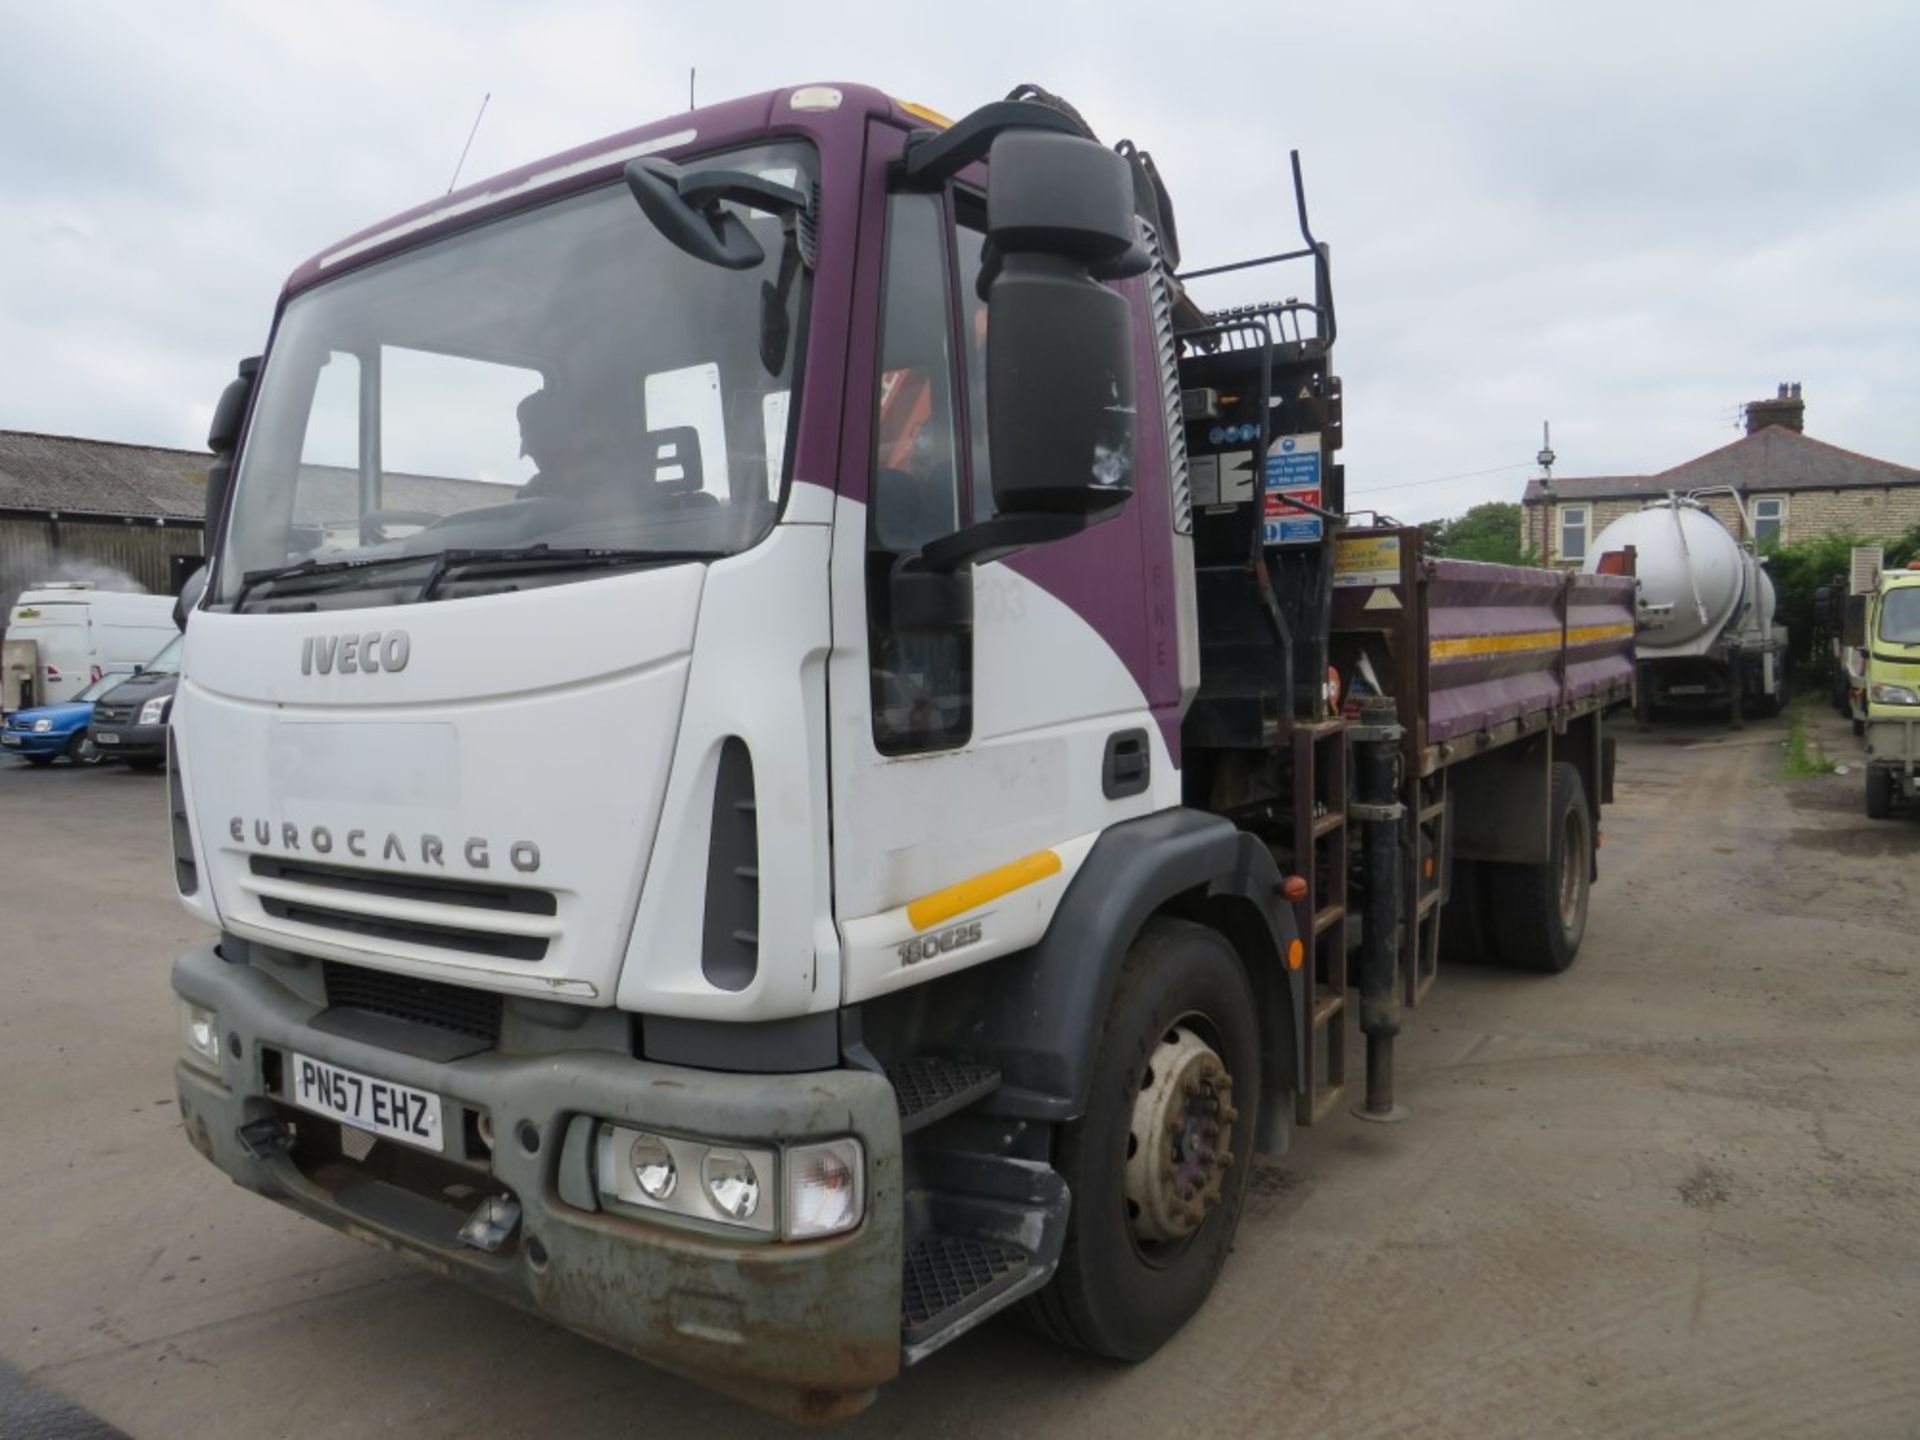 57 reg IVECO EURO CARGO ML180E25 TIPPER (RUNS & DRIVES BUT ONLY IN REVERSE) (DIRECT COUNCIL) 1ST REG - Image 2 of 7